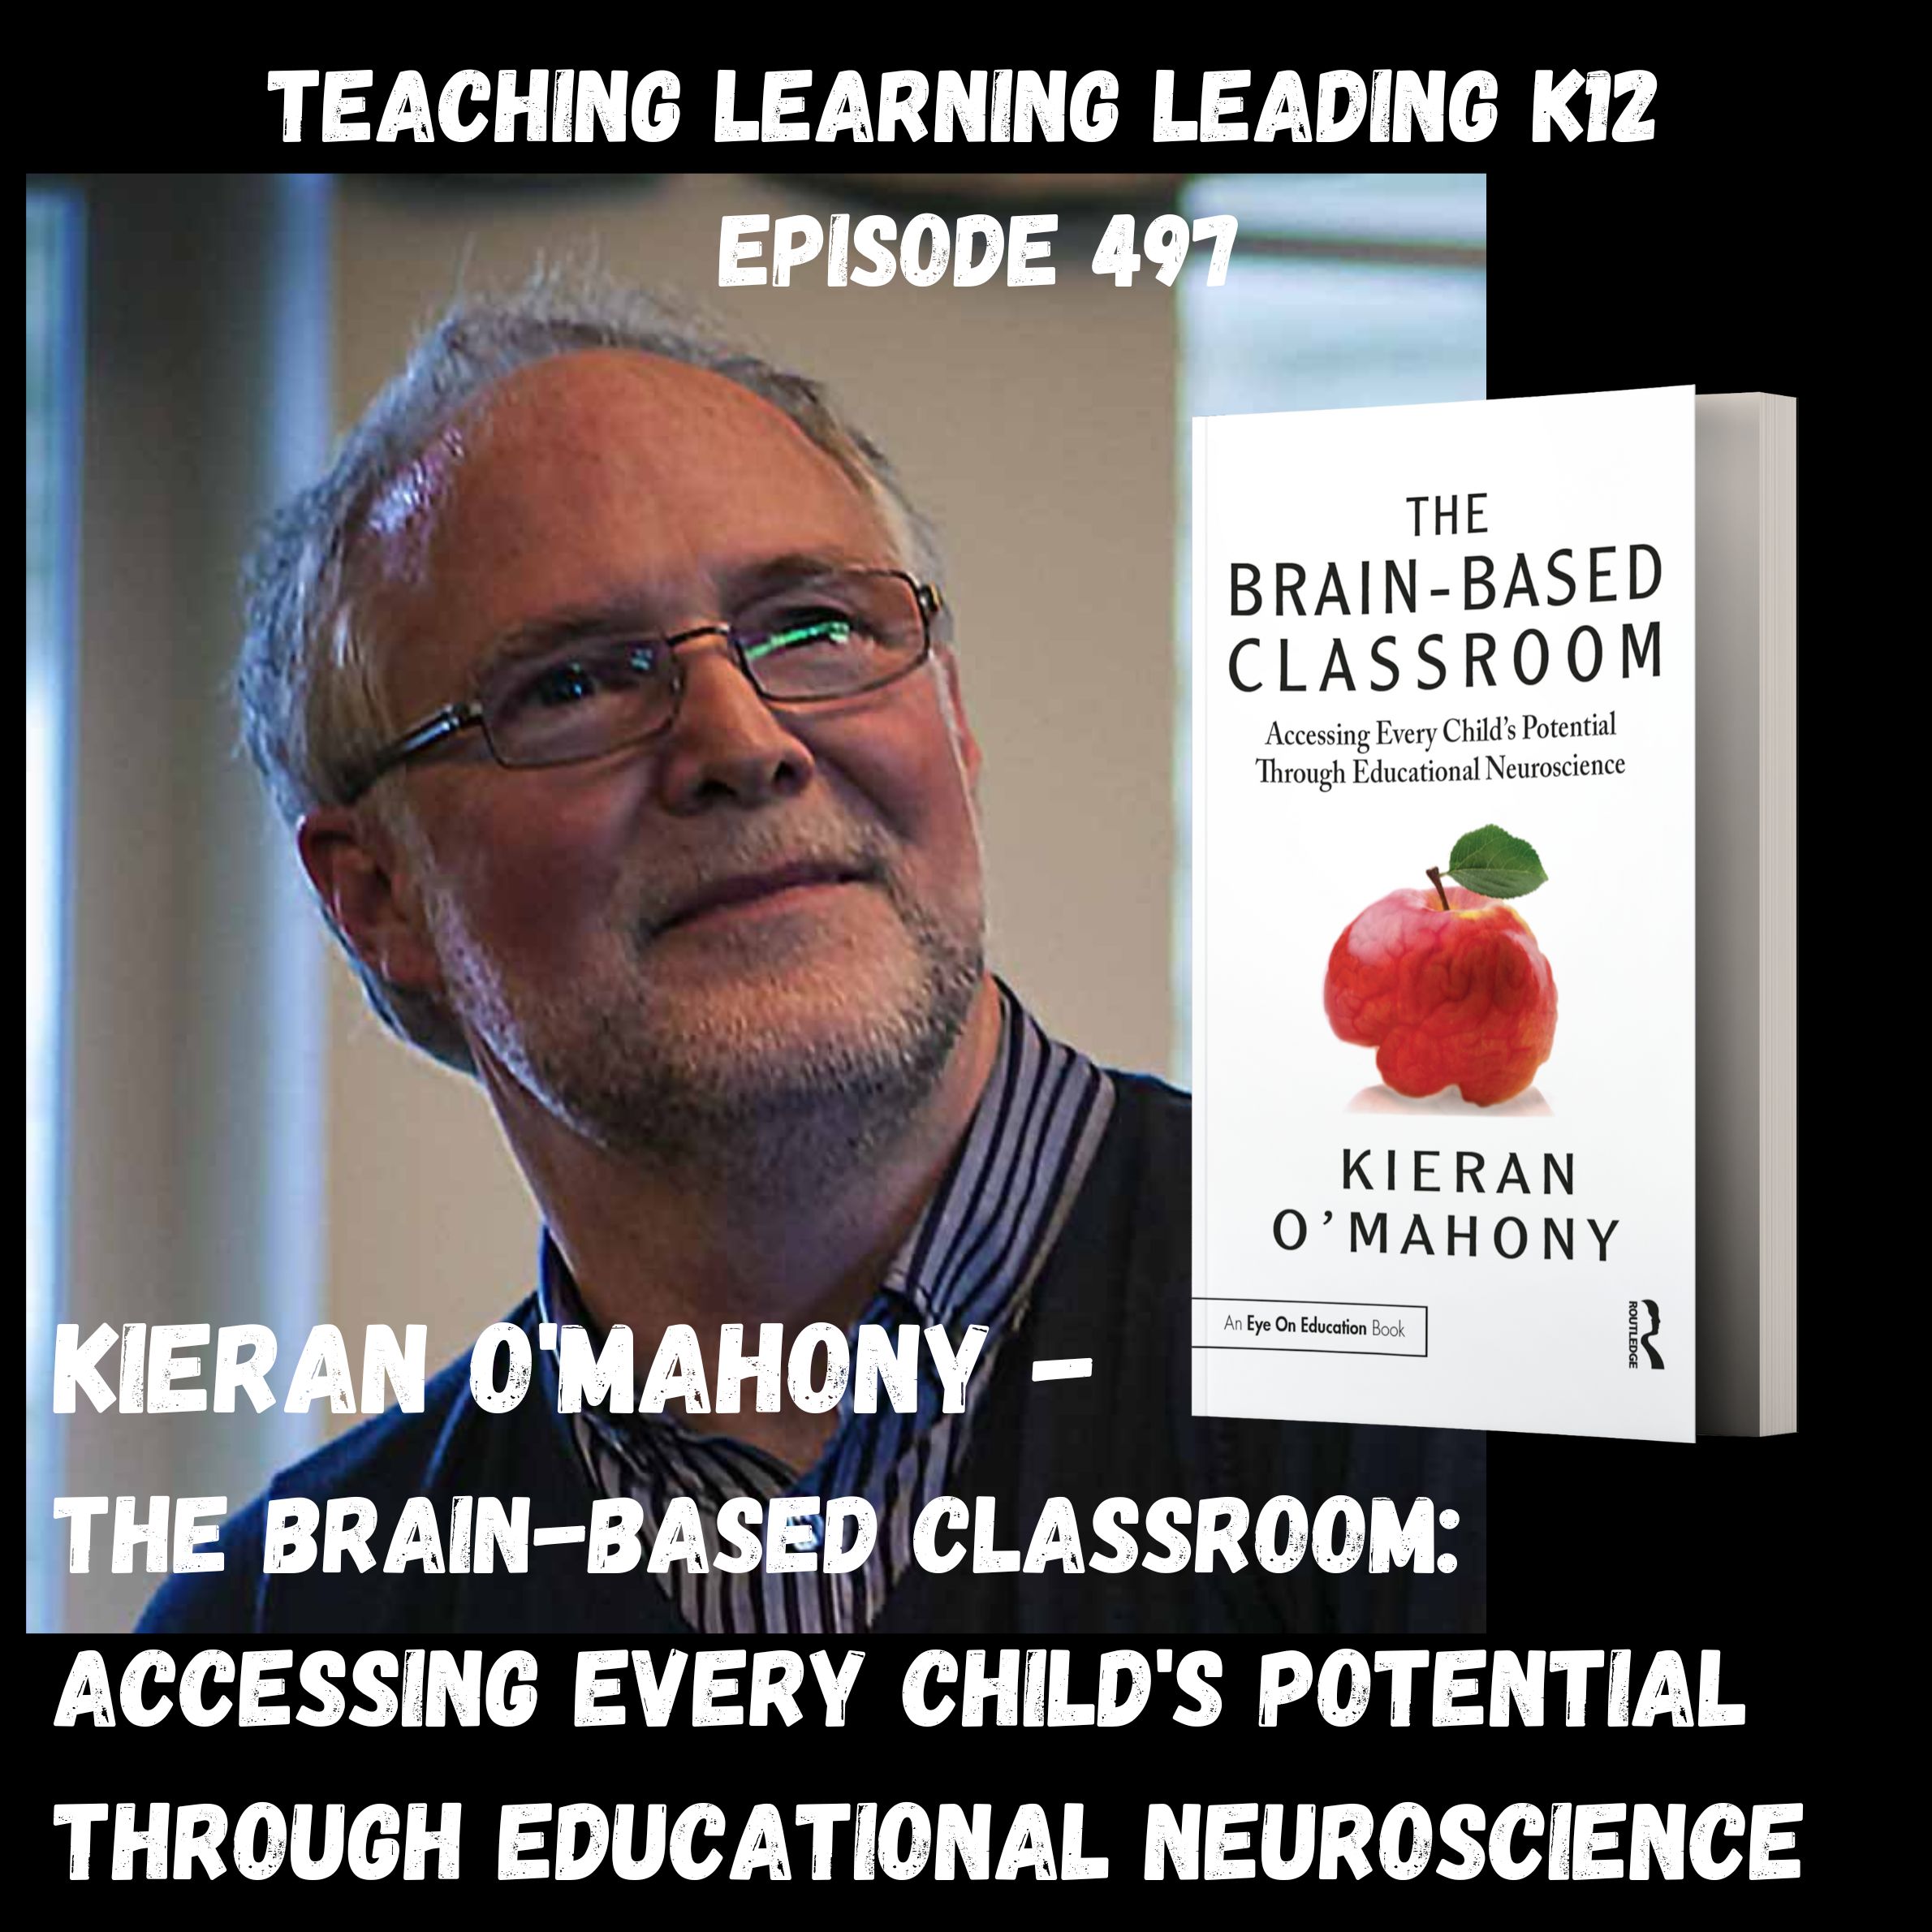 Episode image for Kieran O’Mahony - The Brain-Based Classroom: Accessing Every Child’s Potential Through Educational Neuroscience - 497